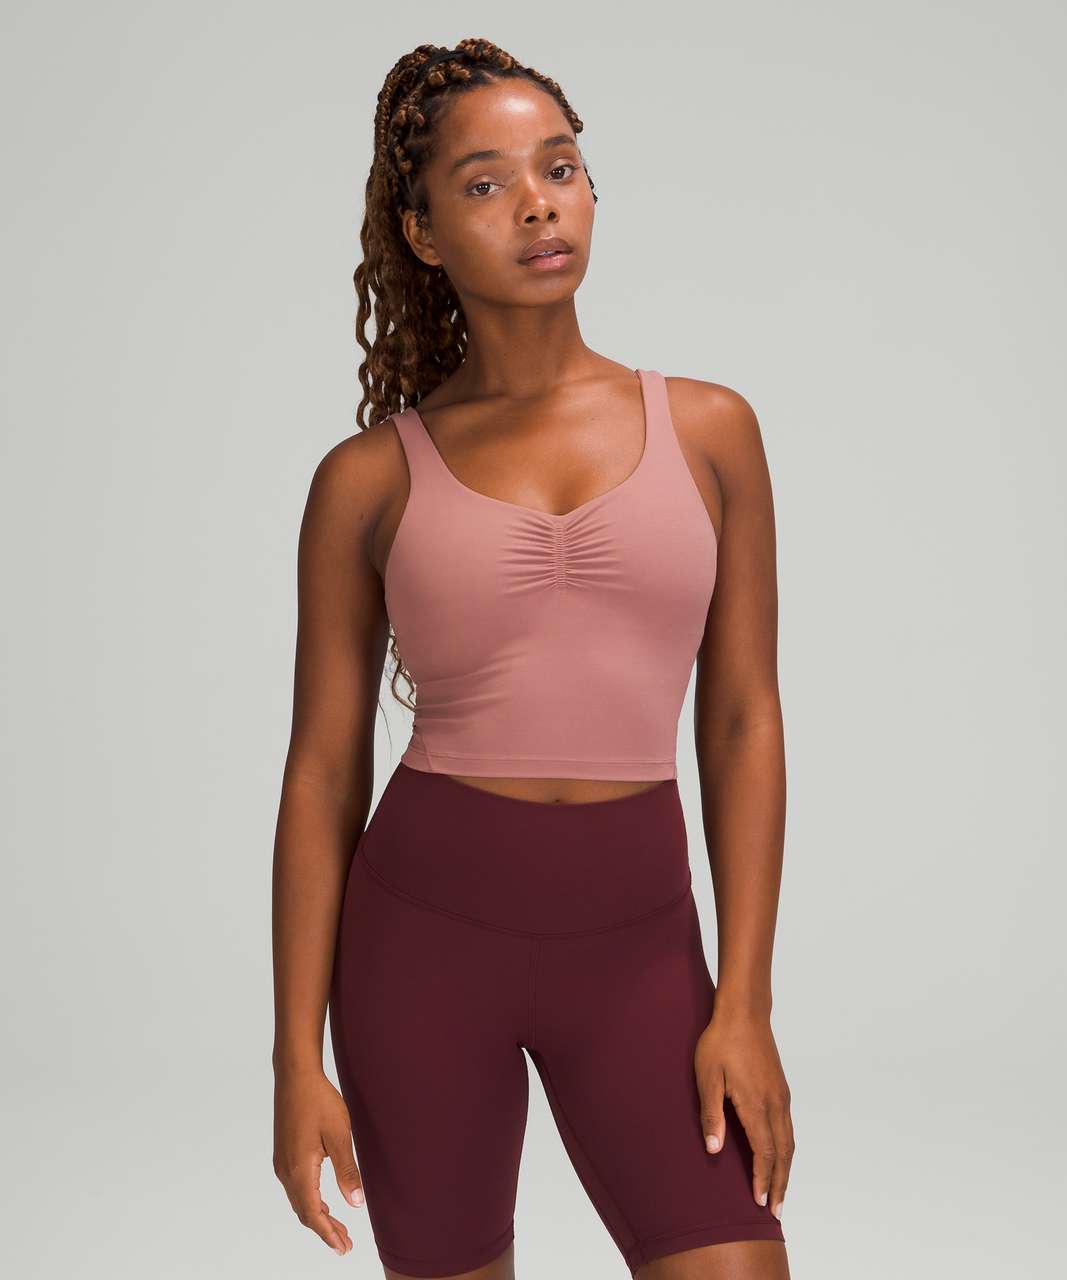 Fit Review! Align Waist Length Tank Top, Align Gathered Front Tank Top,  Align T-Shirt, Align High-Rise Crop 17 inch